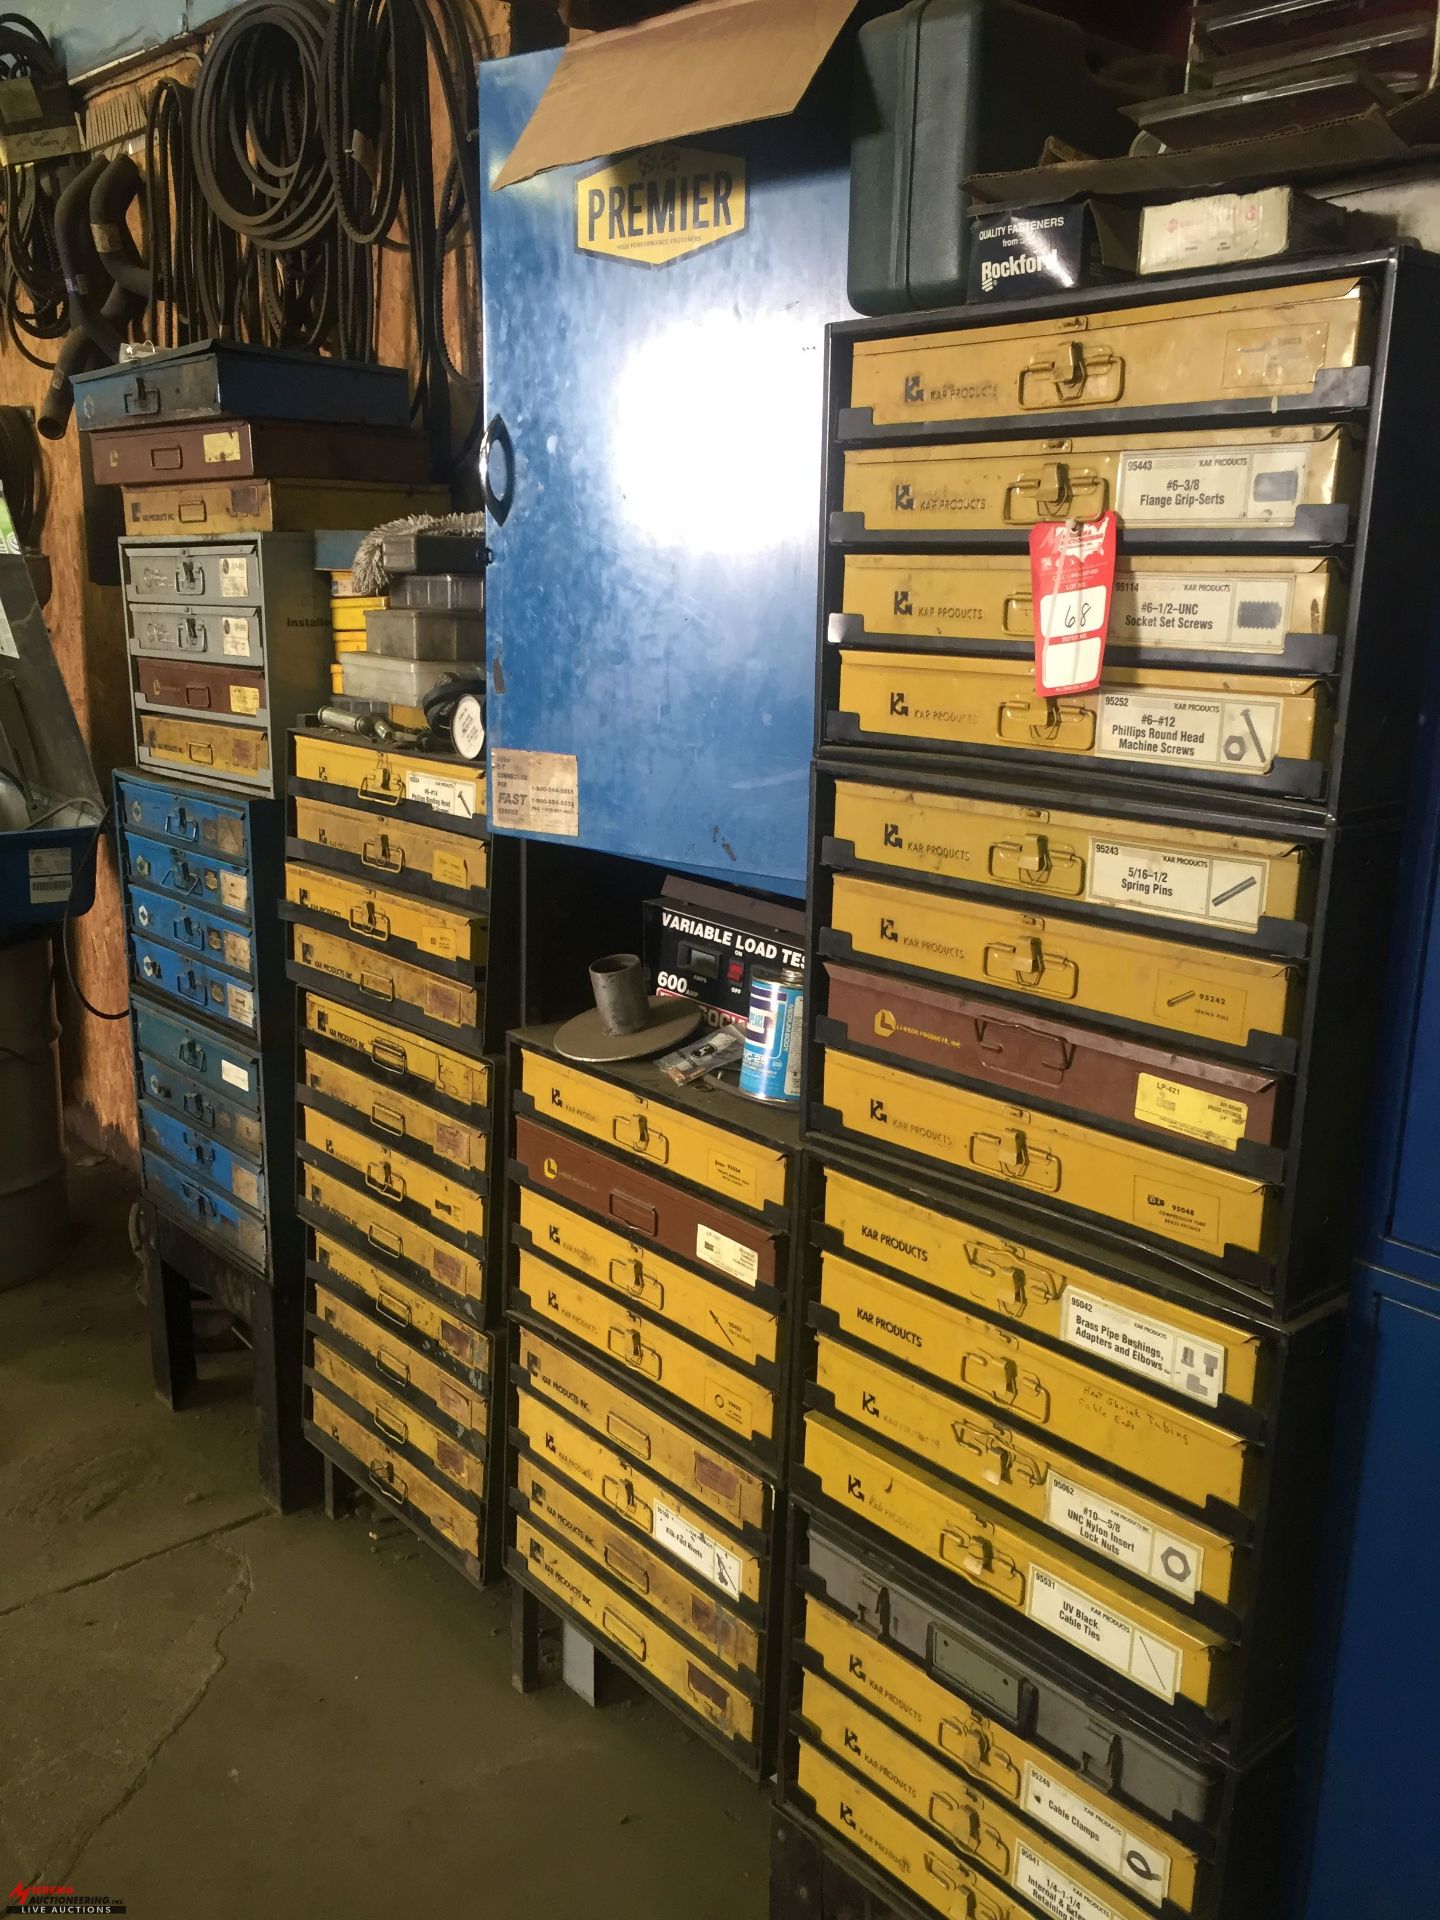 ASSORTED METAL PARTS BINS TO INCLUDE BRASS PIPE FITTINGS, SPRING PINS, SET SCREWS, RIVETS,